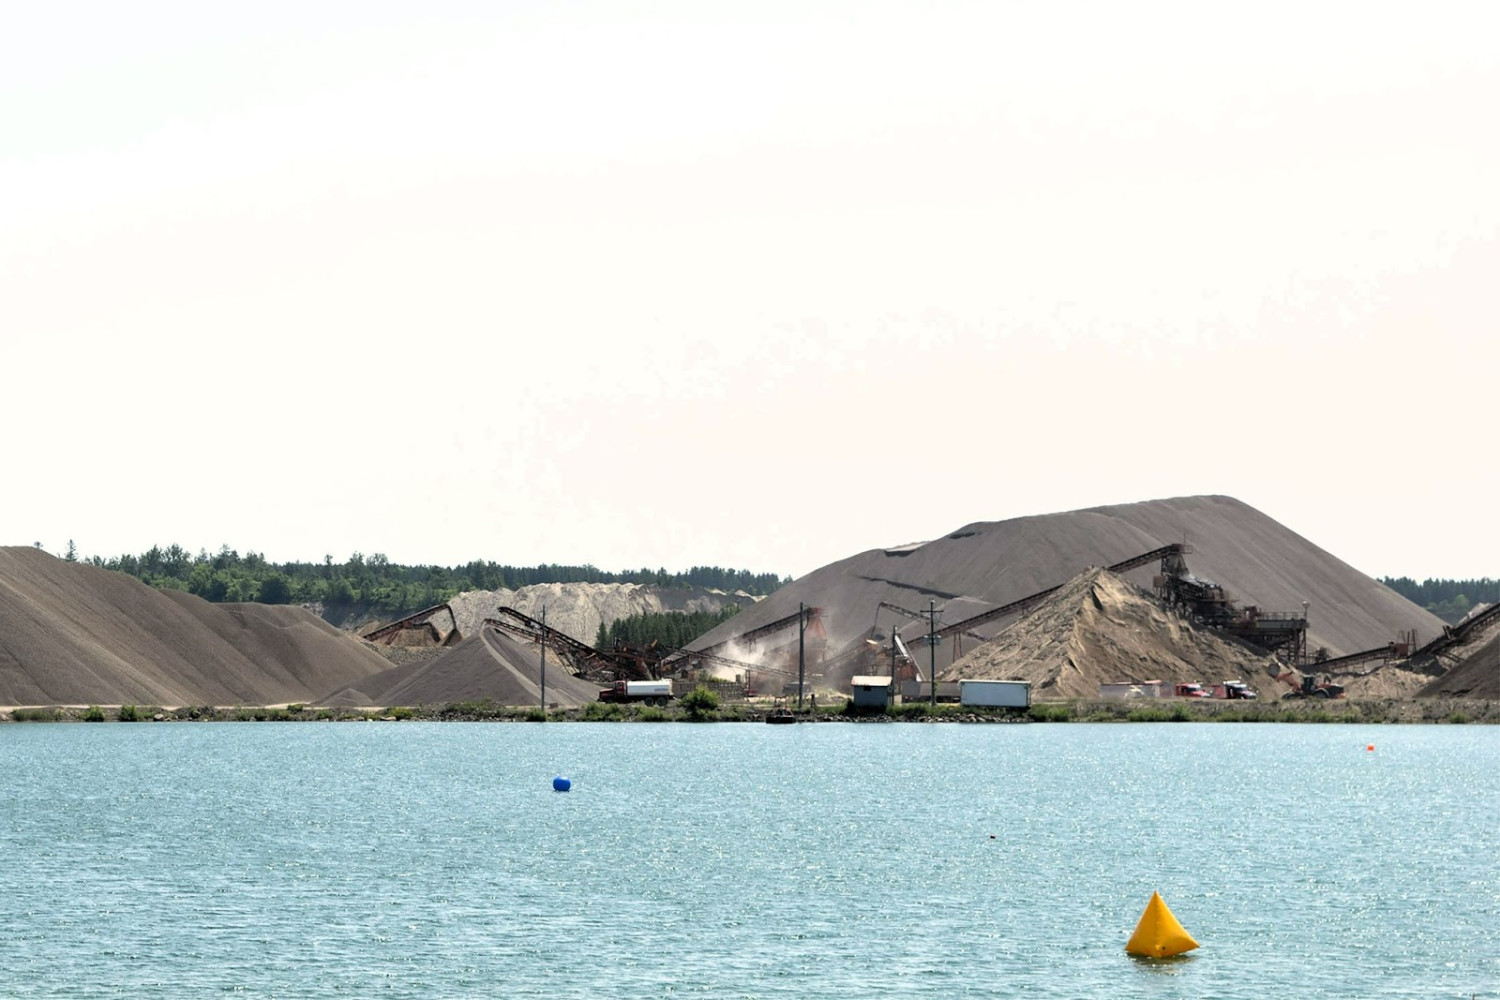 Caledon staff confident aggregate industry will be held accountable by provincial tribunal, despite its track record